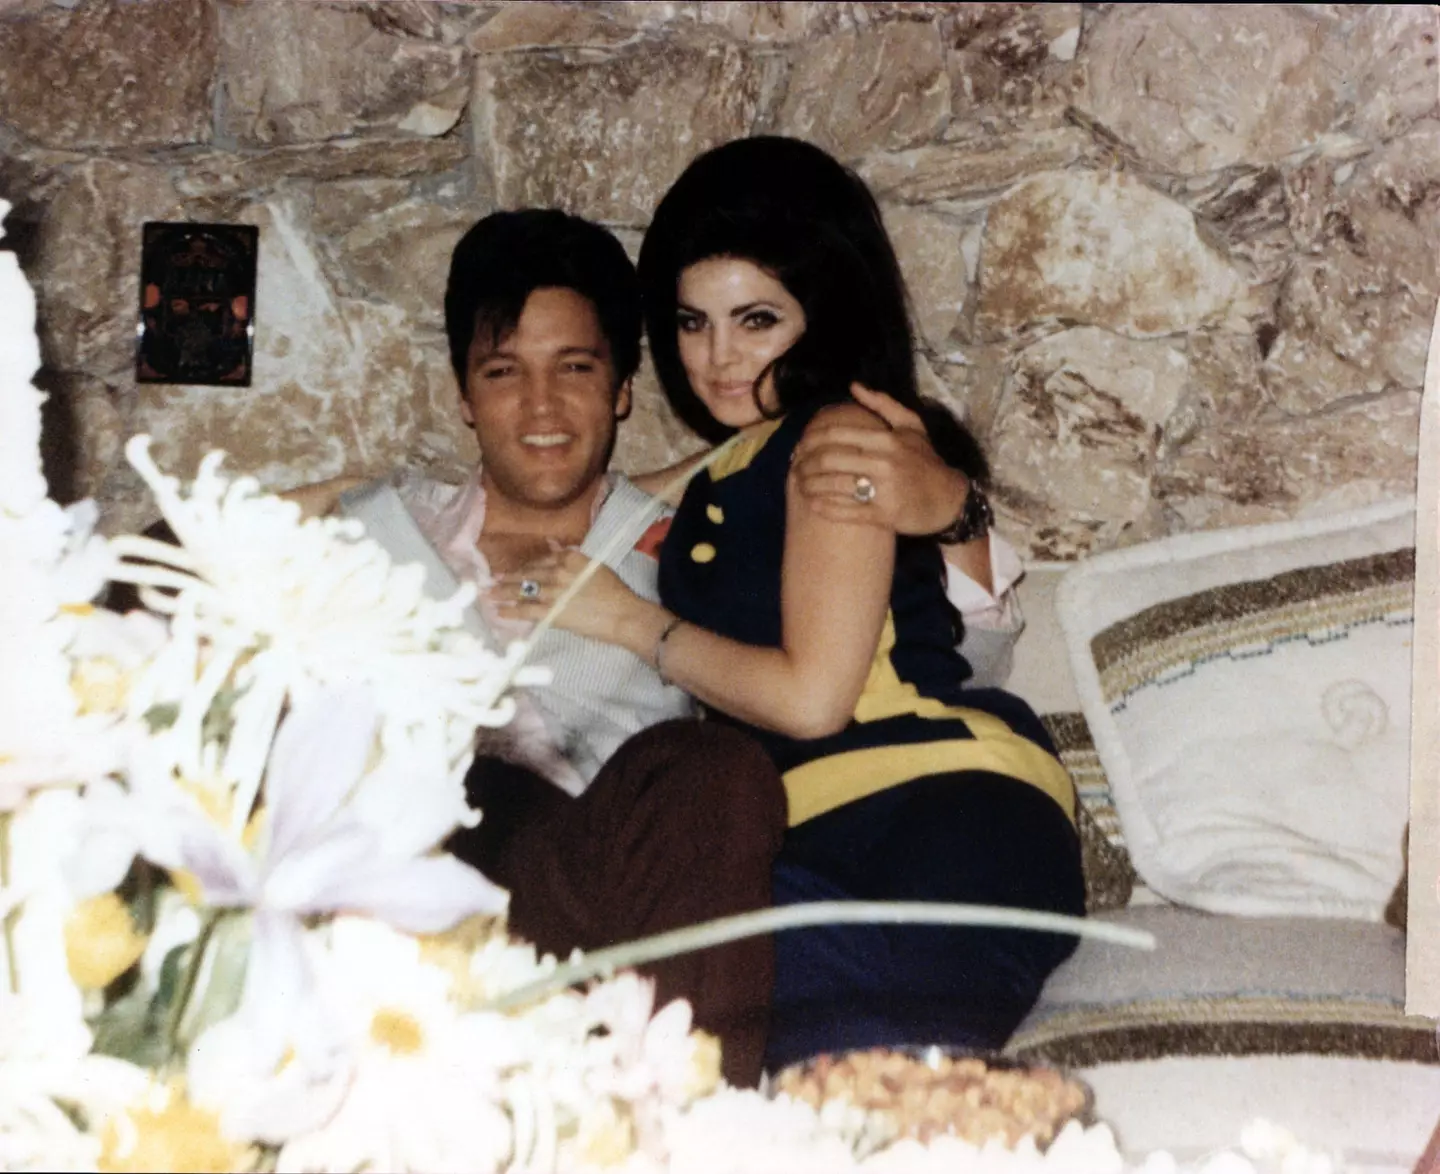 Elvis and Priscilla were married for six years.